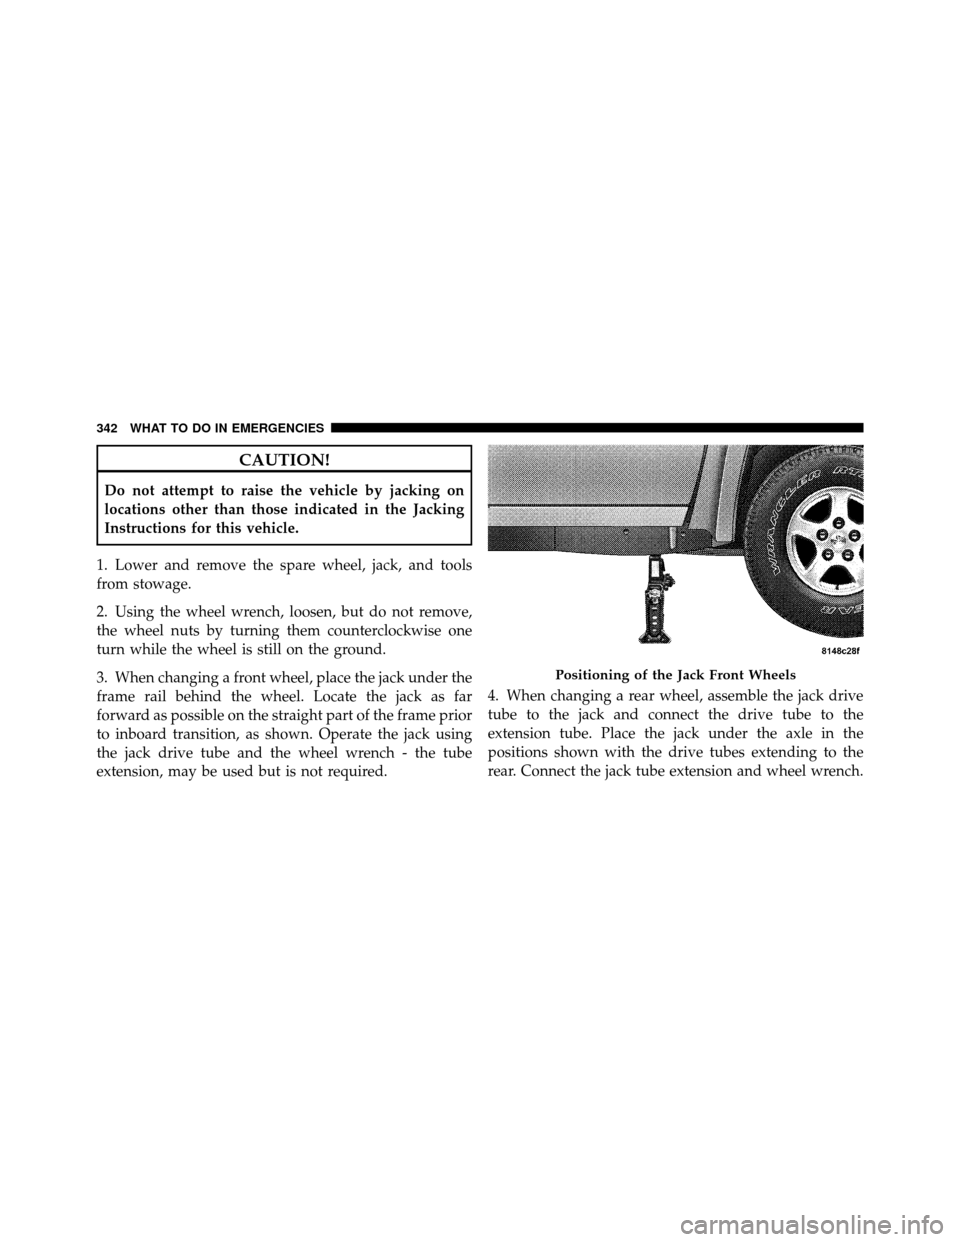 DODGE DAKOTA 2011 3.G Owners Manual CAUTION!
Do not attempt to raise the vehicle by jacking on
locations other than those indicated in the Jacking
Instructions for this vehicle.
1. Lower and remove the spare wheel, jack, and tools
from 